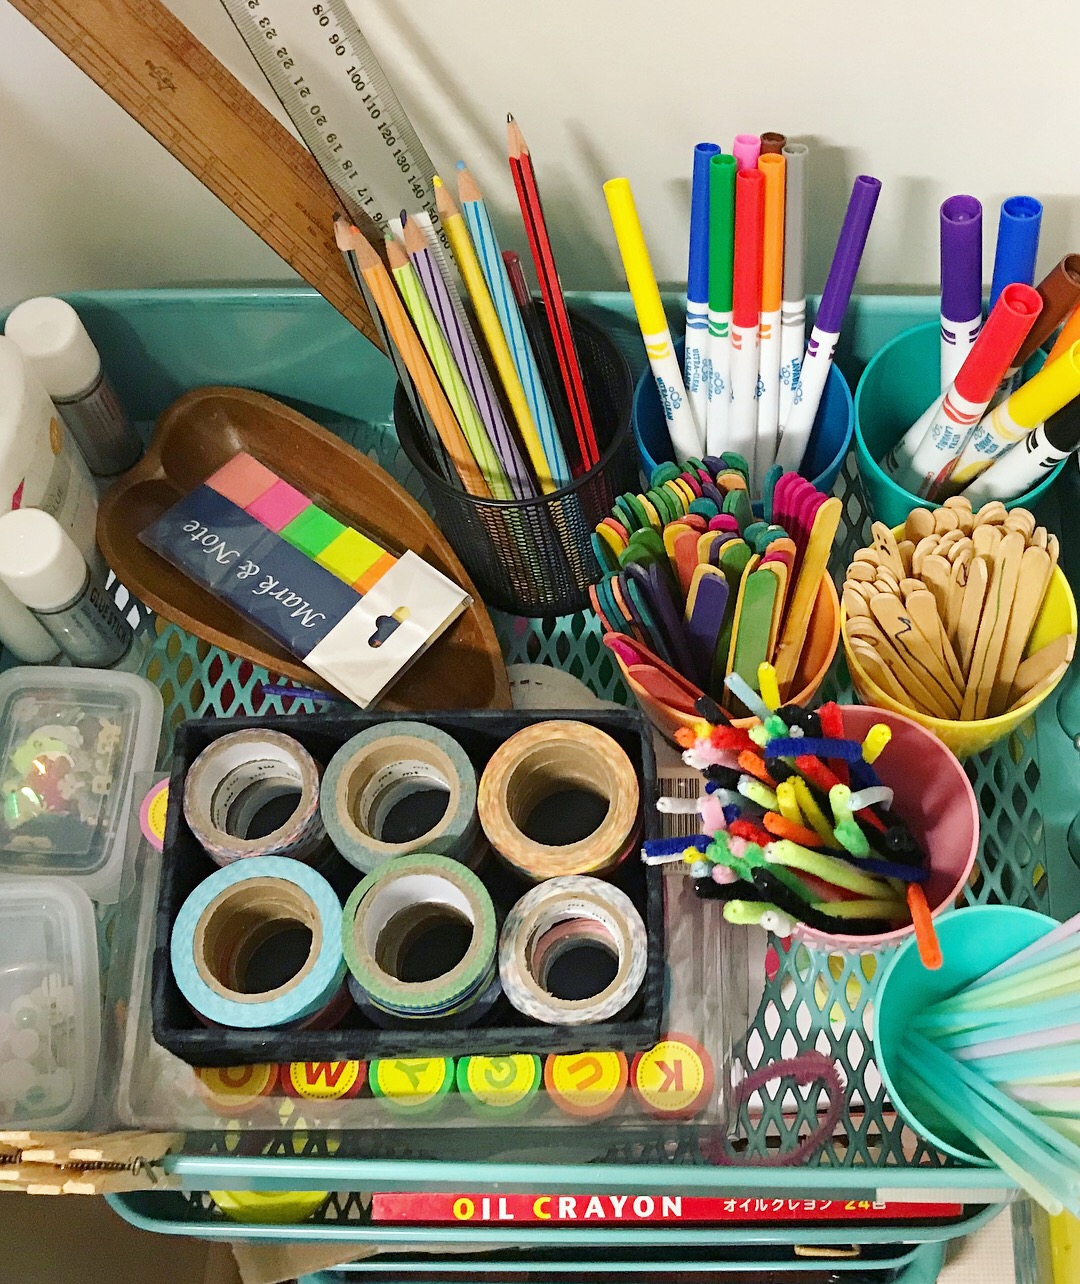 A Dedicated Art Space in the Home (Part 1) - Making Space for Creativity in  Our Household - Stories of Play